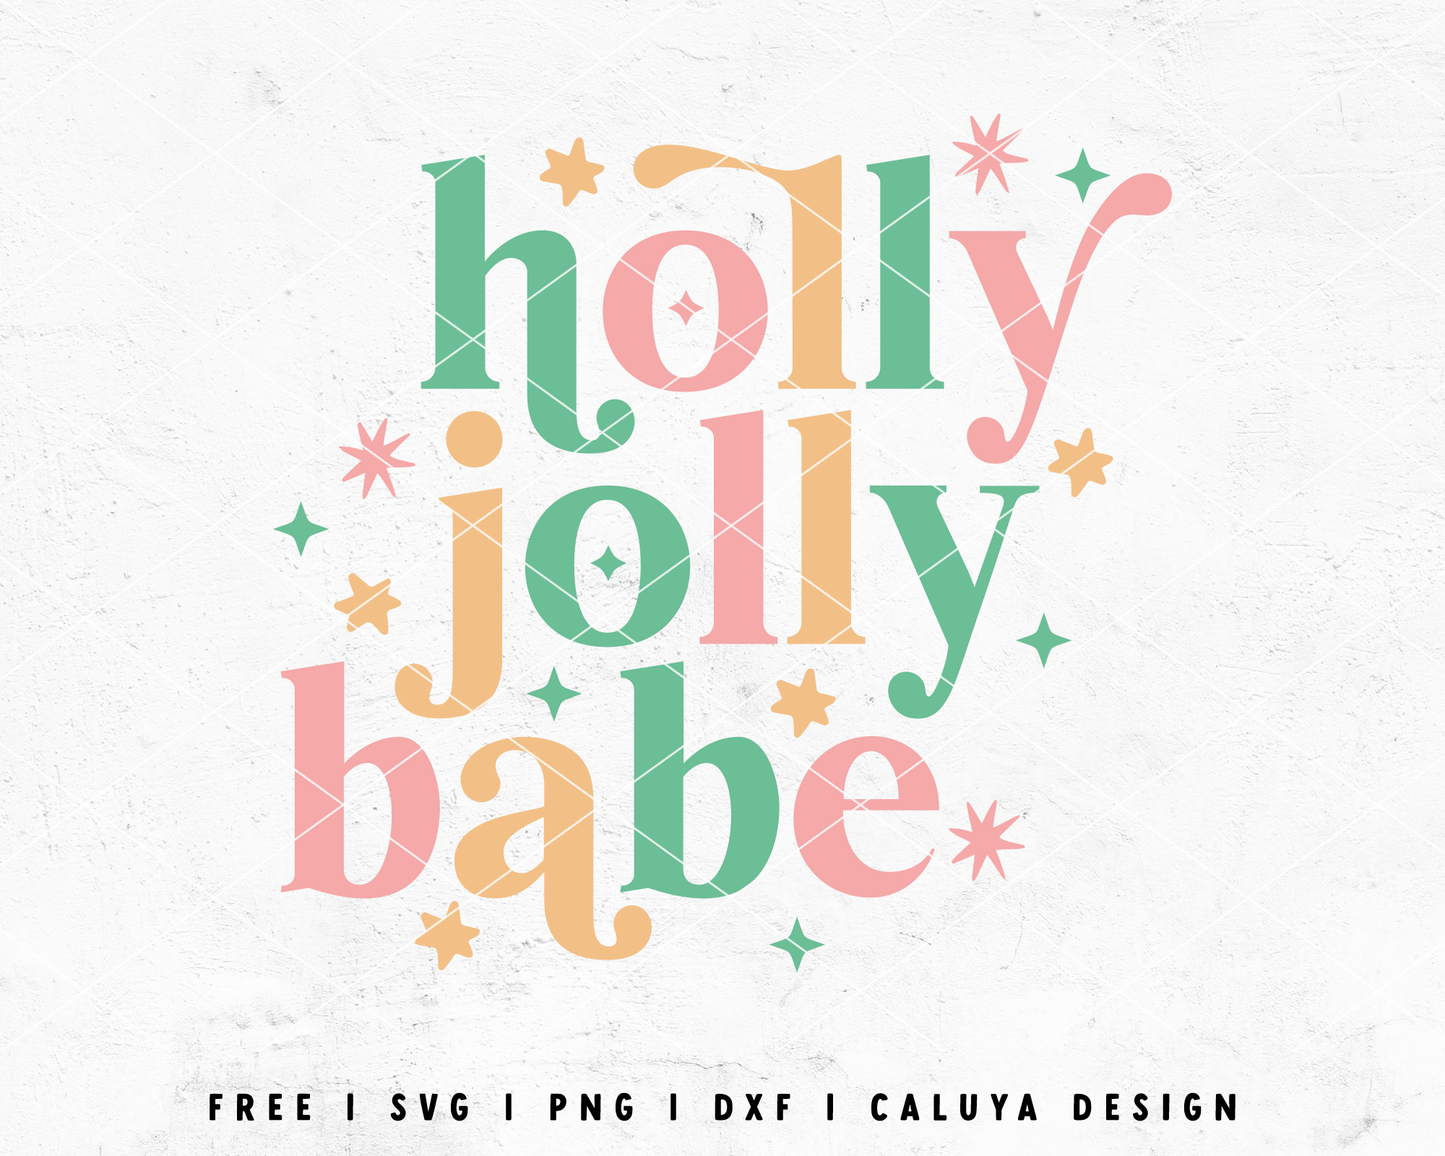 FREE Holly Jolly Babe SVG | Pastel Christmas SVG Cut File for Cricut, Cameo Silhouette | Free SVG Cut File